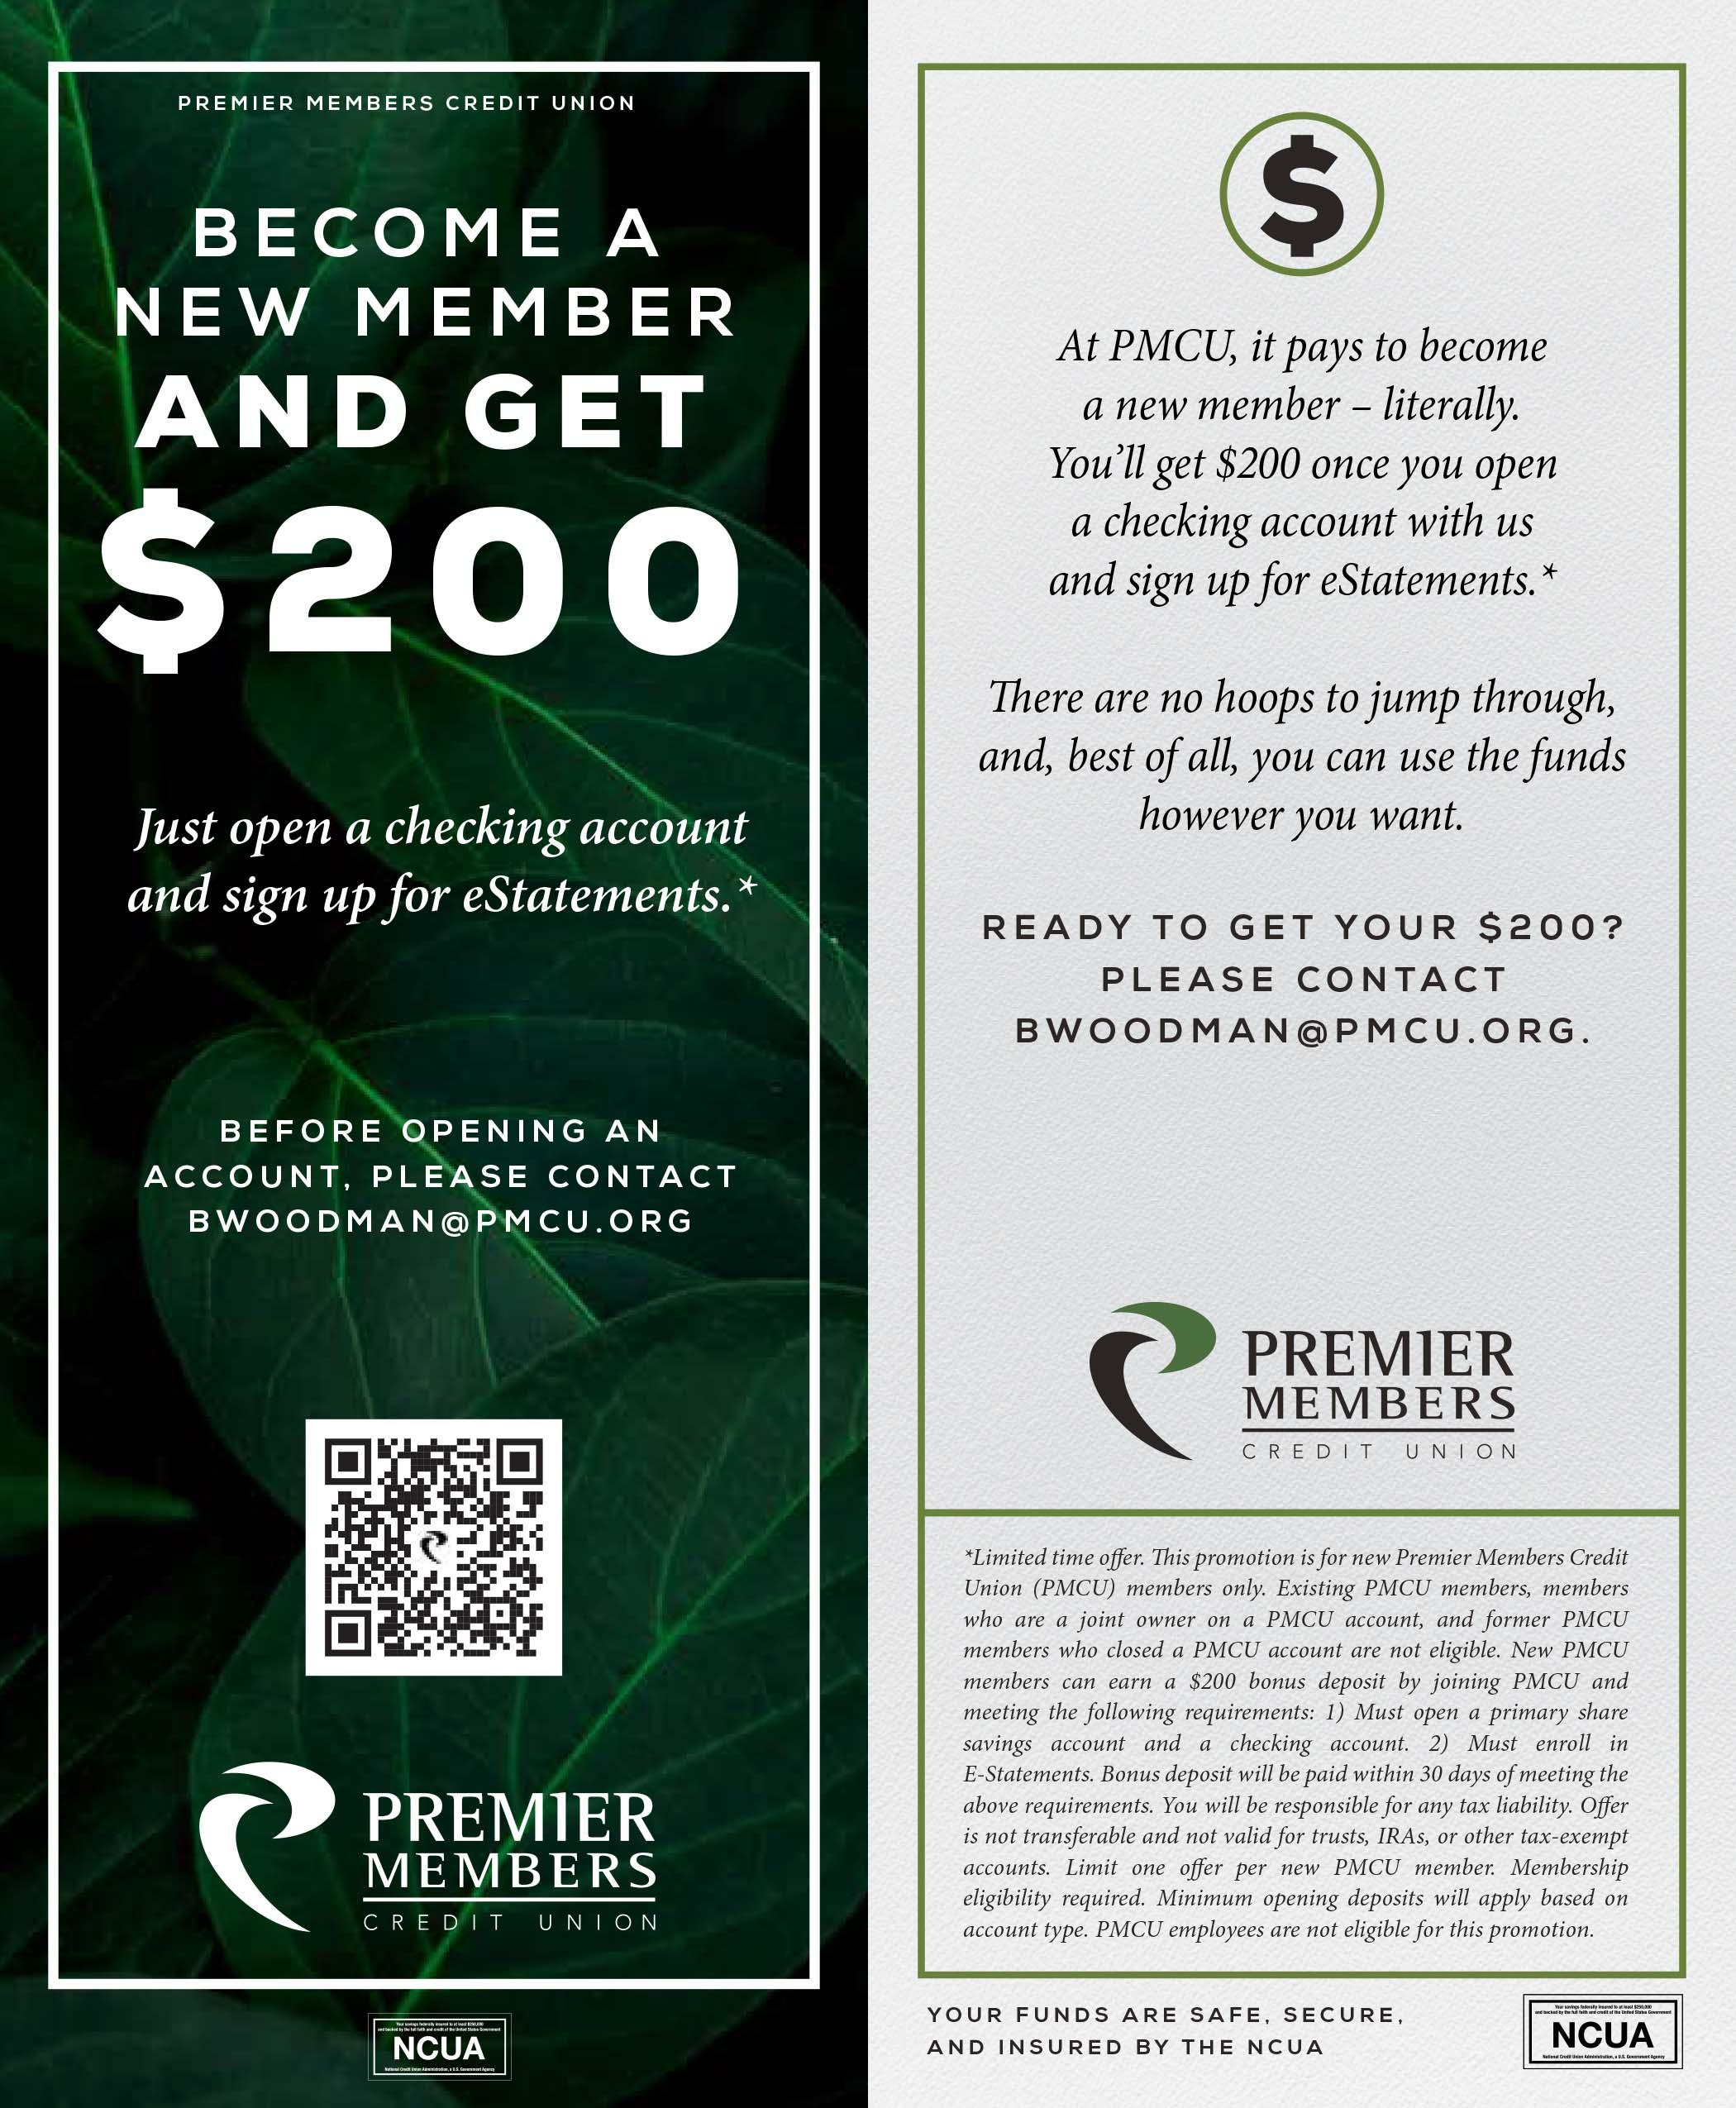 Become a new member and get $200. Just open a checking account and sign up for estatements.* Before opening an account please contact bwoodman@pmcu.org. At PMCU, it pays to become a new member – literally. You’ll get $200 once you open a checking account with us and sign up for eStatements.* there are no hoops to jump through, and, best of all, you can use the funds however you want. READY TO GET YOUR $200? PLEASE CONTACT BWOODMAN@PMCU.ORG.*Limited time oer. is promotion is for new Premier Members Credit<br>Union (PMCU) members only. Existing PMCU members, members<br>who are a joint owner on a PMCU account, and former PMCU<br>members who closed a PMCU account are not eligible. New PMCU<br>members can earn a $200 bonus deposit by joining PMCU and<br>meeting the following requirements: 1) Must open a primary share<br>savings account and a checking account. 2) Must enroll in<br>E-Statements. Bonus deposit will be paid within 30 days of meeting the<br>above requirements. You will be responsible for any tax liability. Oer<br>is not transferable and not valid for trusts, IRAs, or other tax-exempt<br>accounts. Limit one oer per new PMCU member. Membership<br>eligibility required. Minimum opening deposits will apply based on<br>account type. PMCU employees are not eligible for this promotion.